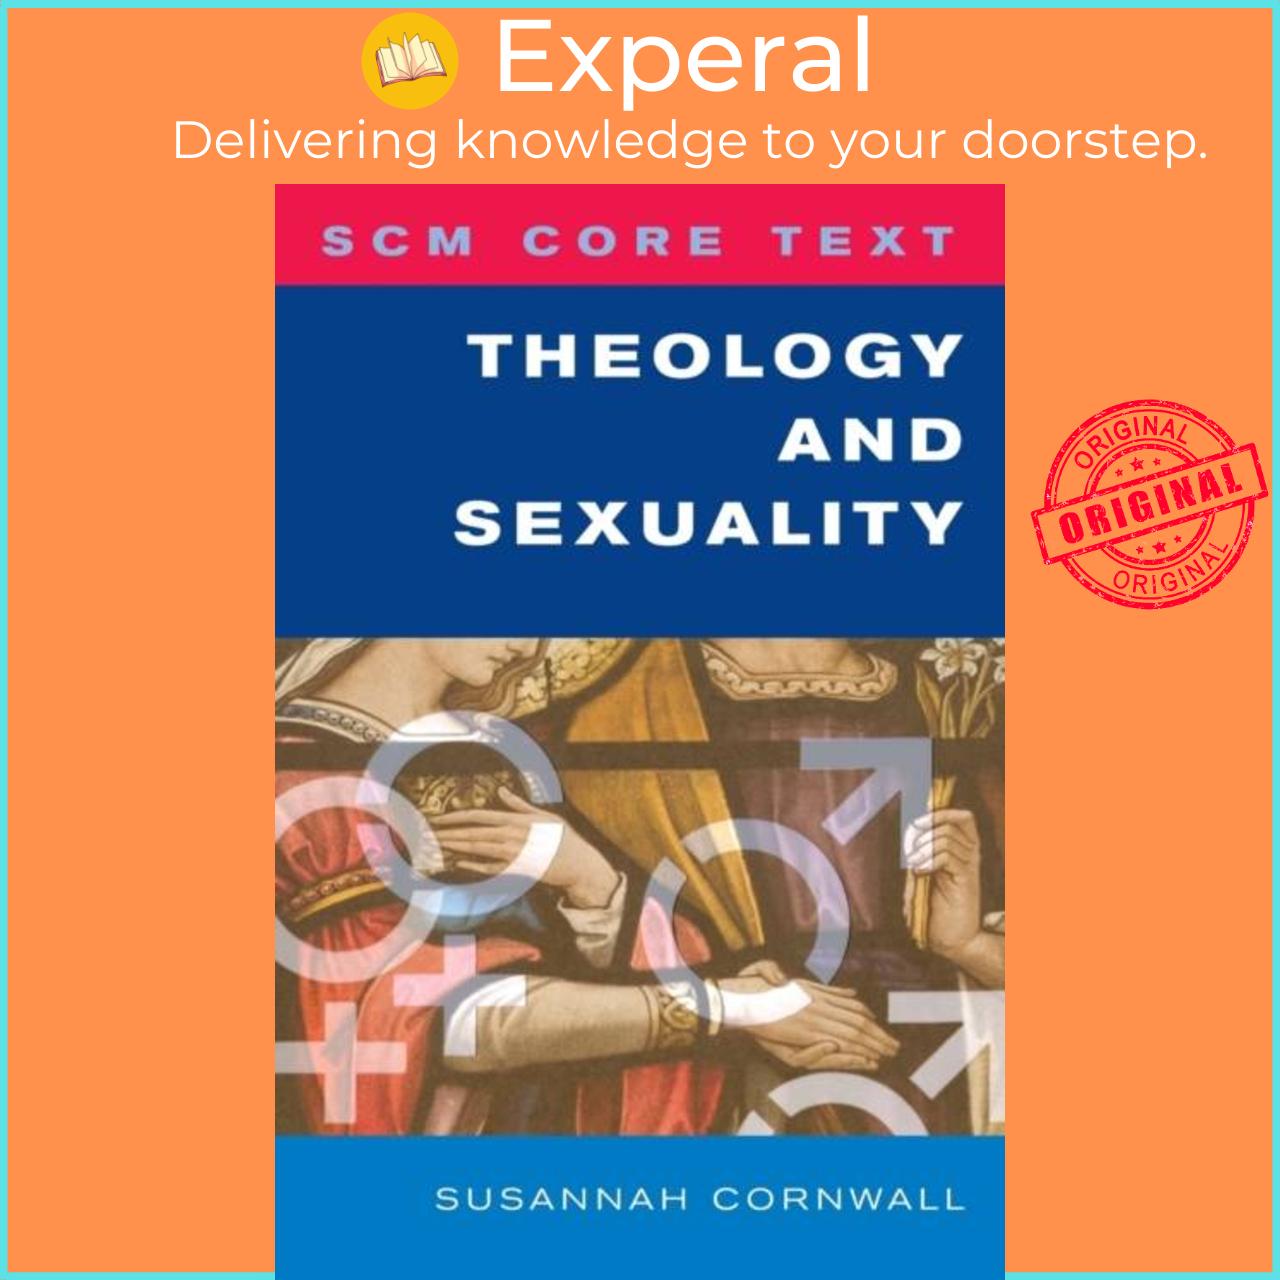 Hình ảnh Sách - SCM Core Text Theology and uality by Susannah Cornwall (UK edition, paperback)